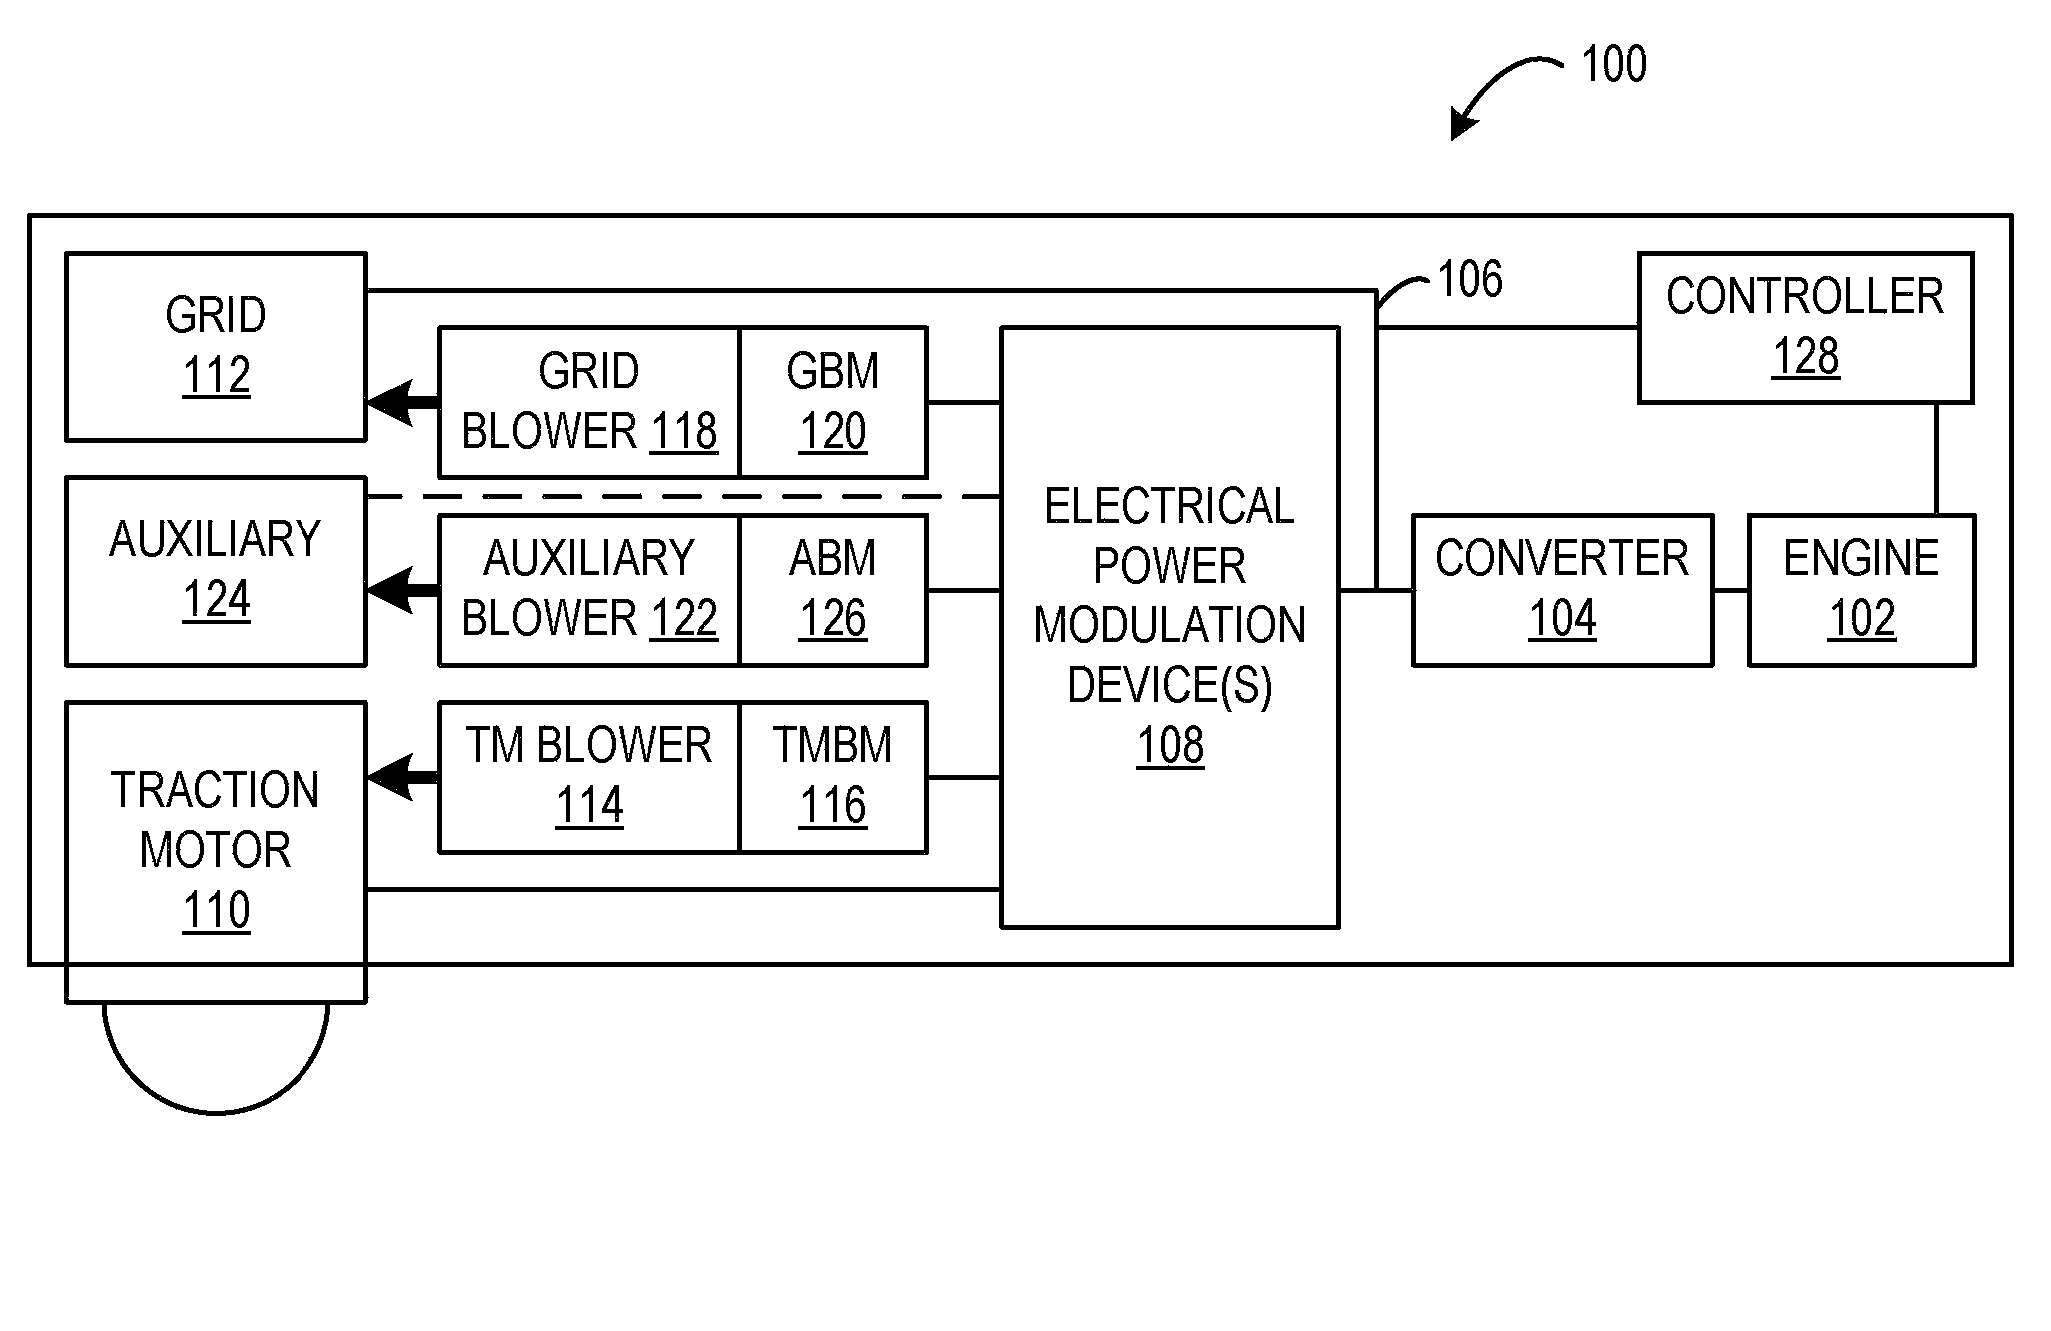 Variable-speed-drive system for a grid blower